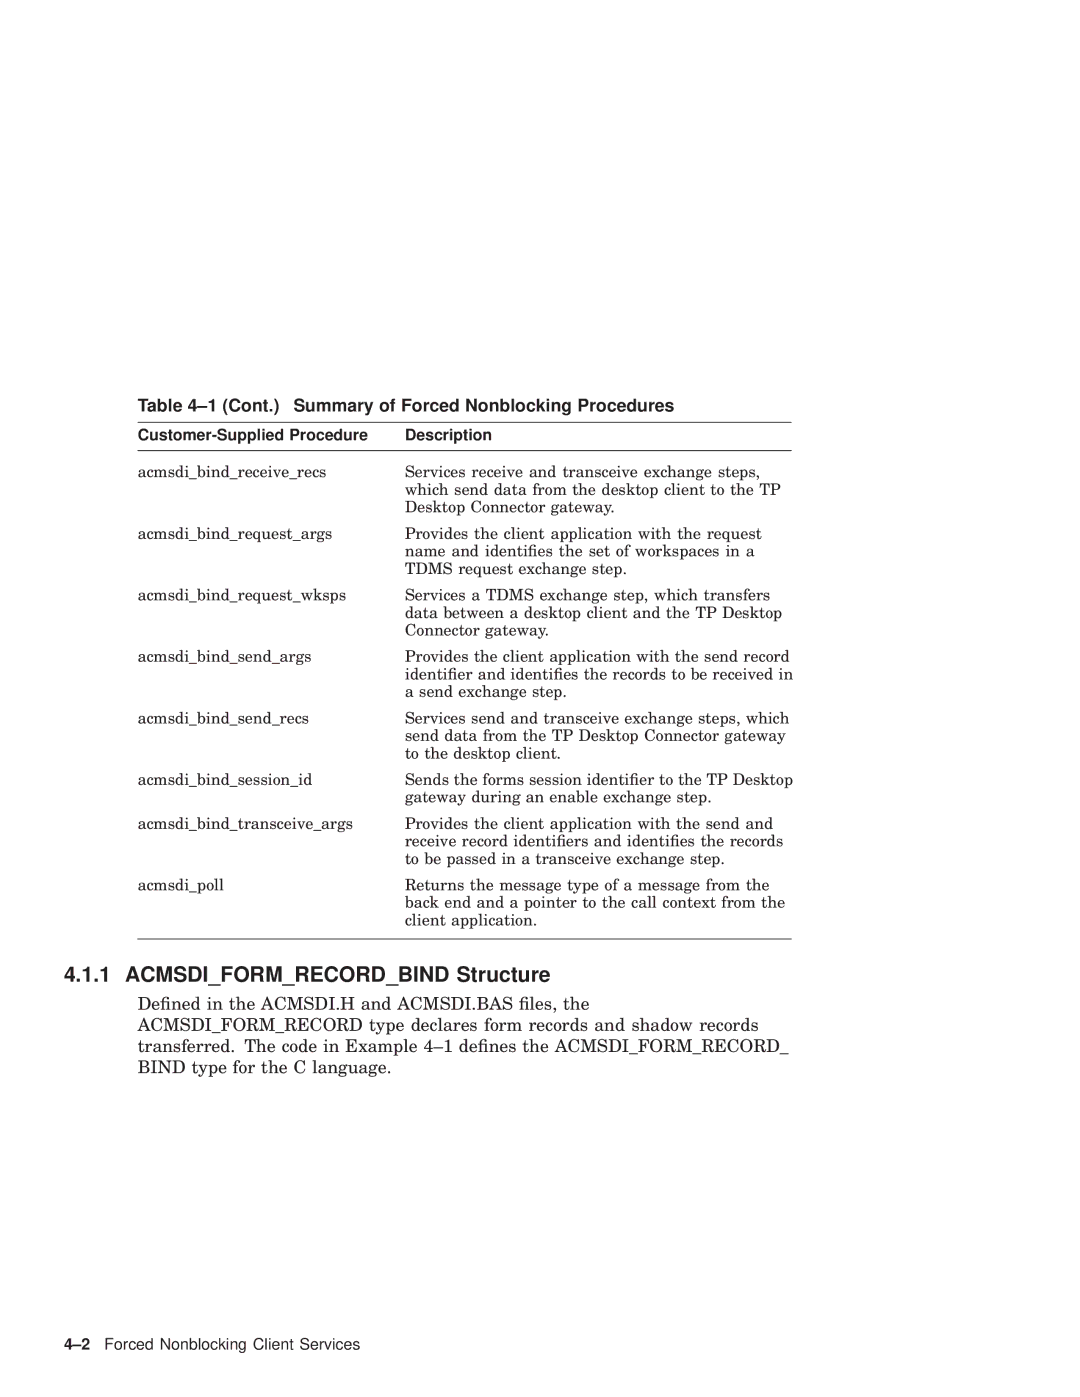 Compaq AAPVNFGTE manual Acmsdiformrecordbind Structure, Cont. Summary of Forced Nonblocking Procedures 